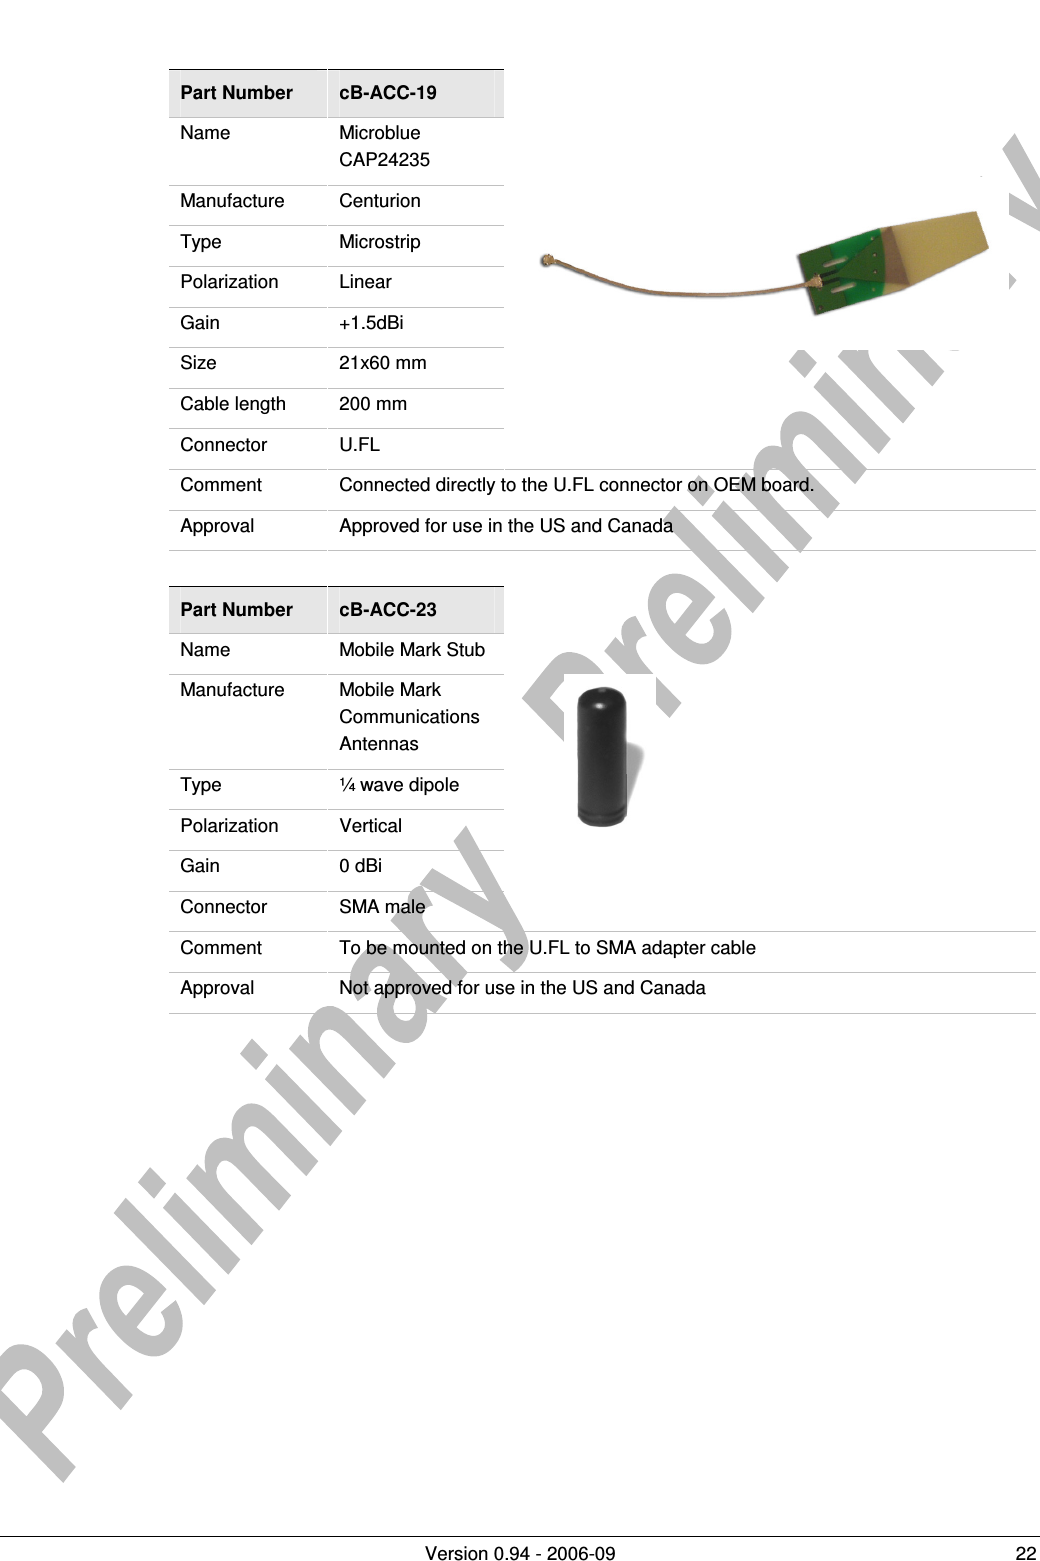          Version 0.94 - 2006-09  22  Part Number  cB-ACC-19 Name  Microblue CAP24235  Manufacture  Centurion Type  Microstrip Polarization  Linear Gain  +1.5dBi Size  21x60 mm Cable length  200 mm Connector  U.FL  Comment  Connected directly to the U.FL connector on OEM board. Approval  Approved for use in the US and Canada  Part Number  cB-ACC-23 Name  Mobile Mark Stub  Manufacture  Mobile Mark Communications Antennas Type  ¼ wave dipole Polarization  Vertical Gain  0 dBi Connector  SMA male  Comment  To be mounted on the U.FL to SMA adapter cable Approval  Not approved for use in the US and Canada  